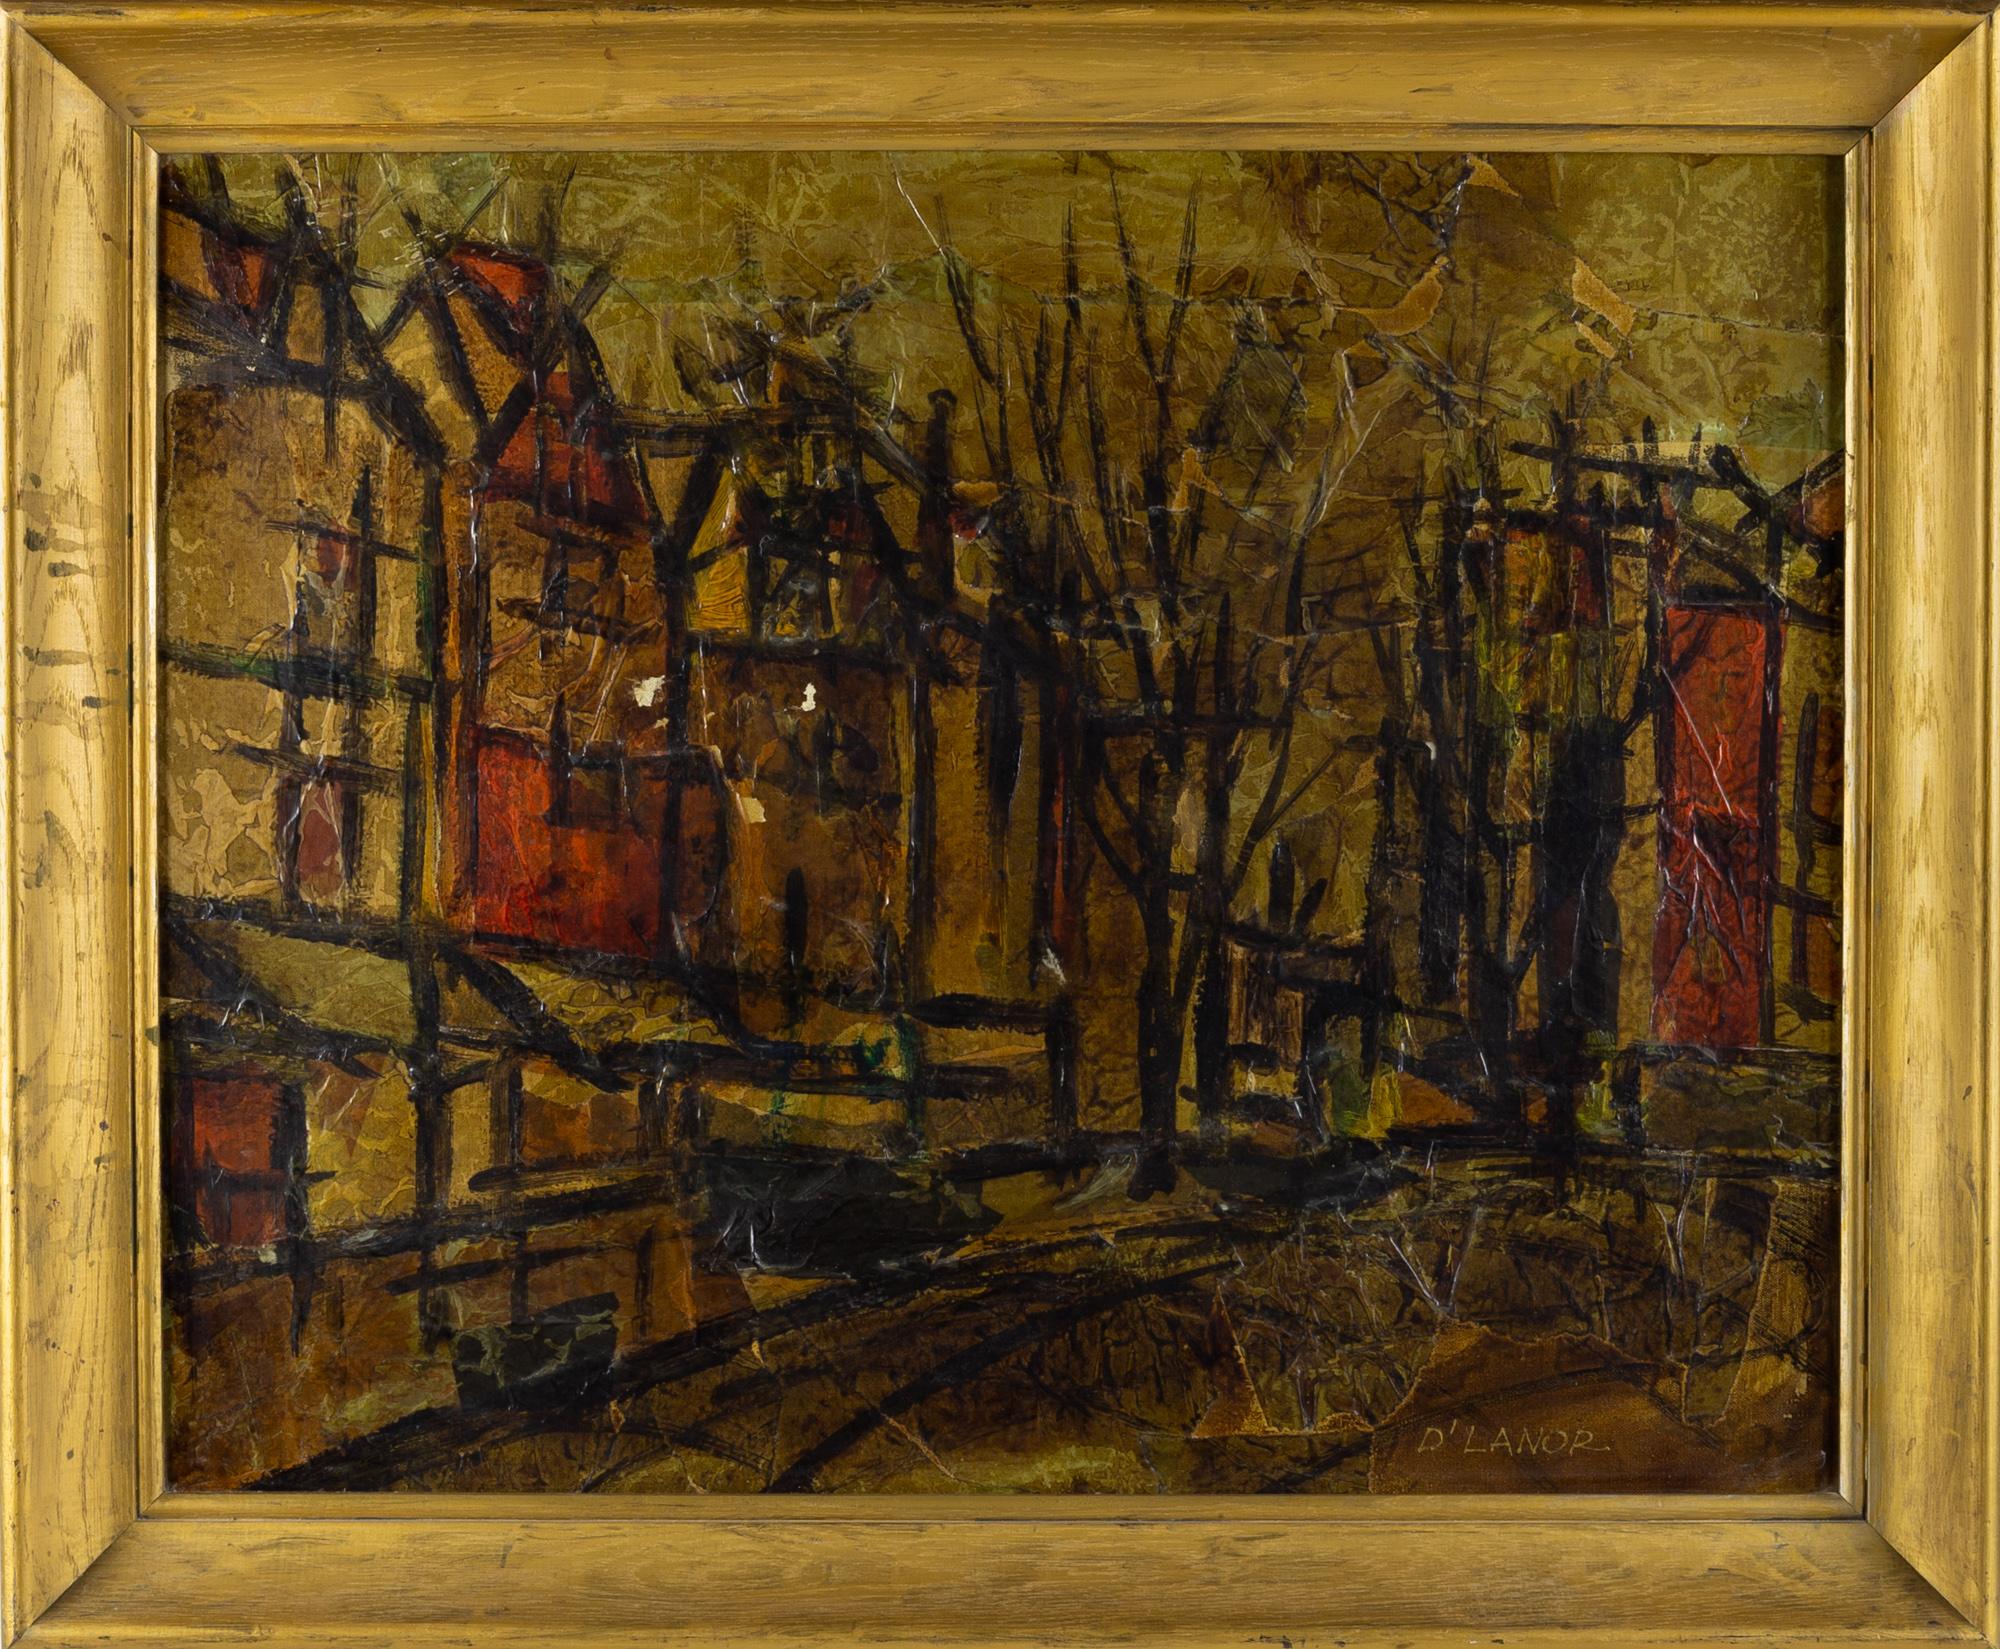 Mid century D'Lanor abstract cityscape oil on canvas painting

This piece measures: 34.5 wide x 3 deep x 28.5 inches high

This painting is in great vintage condition.

Each piece is carefully cleaned and packaged before being shipped to you.